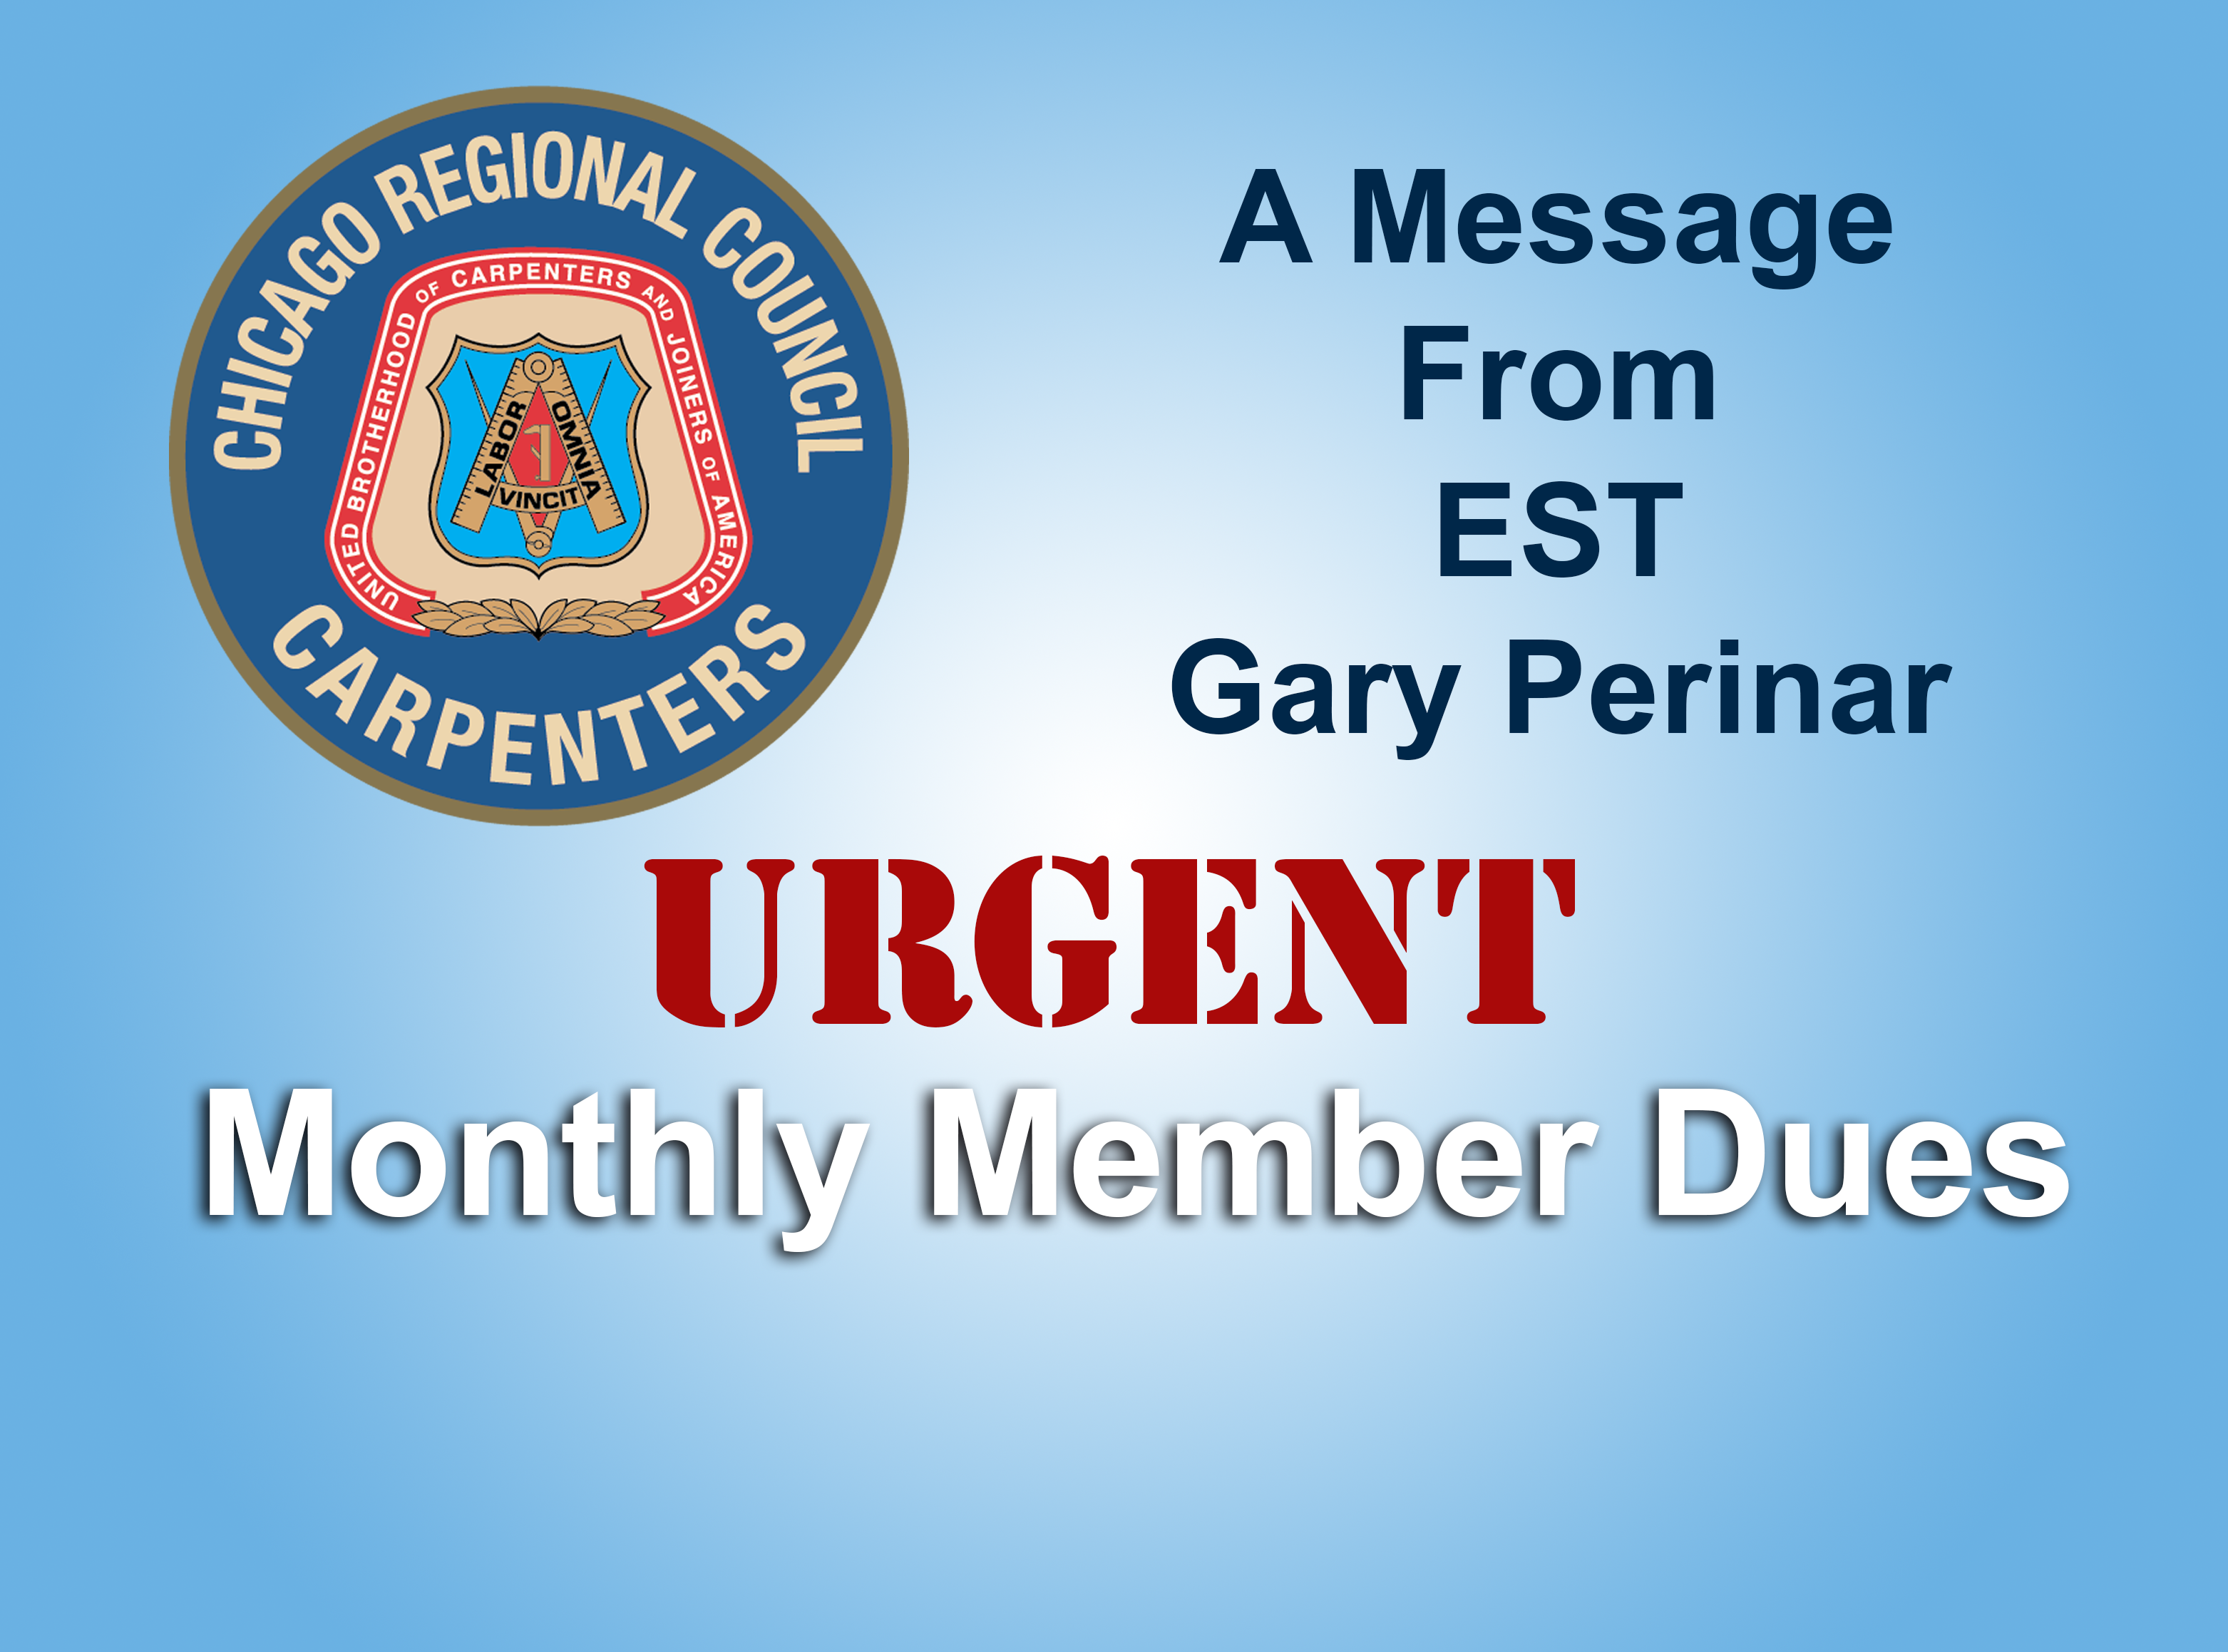 monthly member dues message